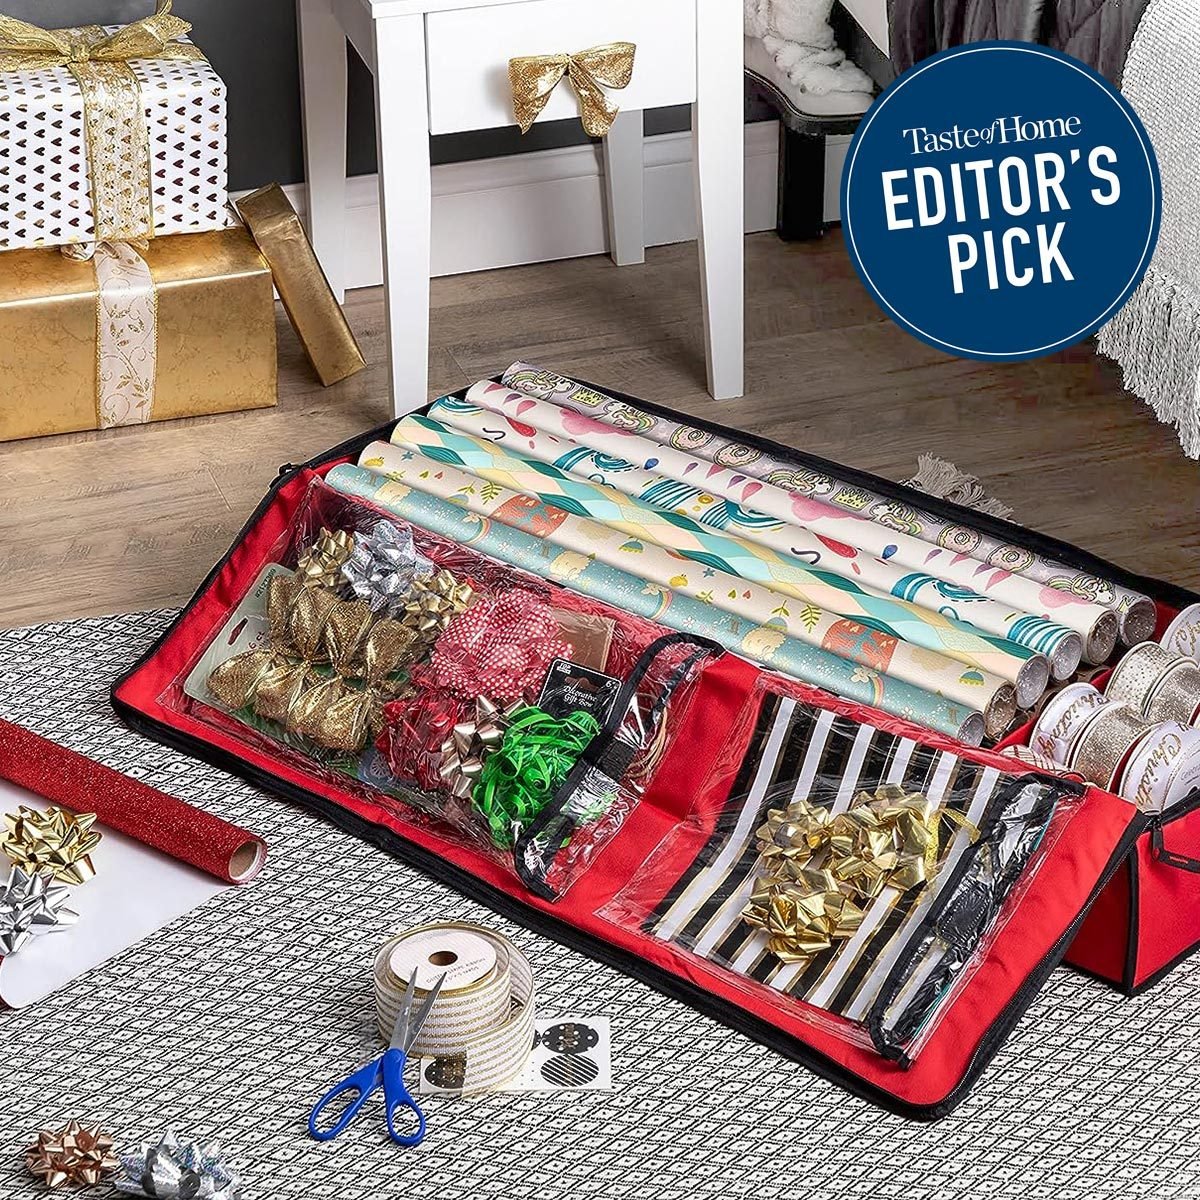 This Wrapping Paper Organizer Is a Holiday Gifting Miracle